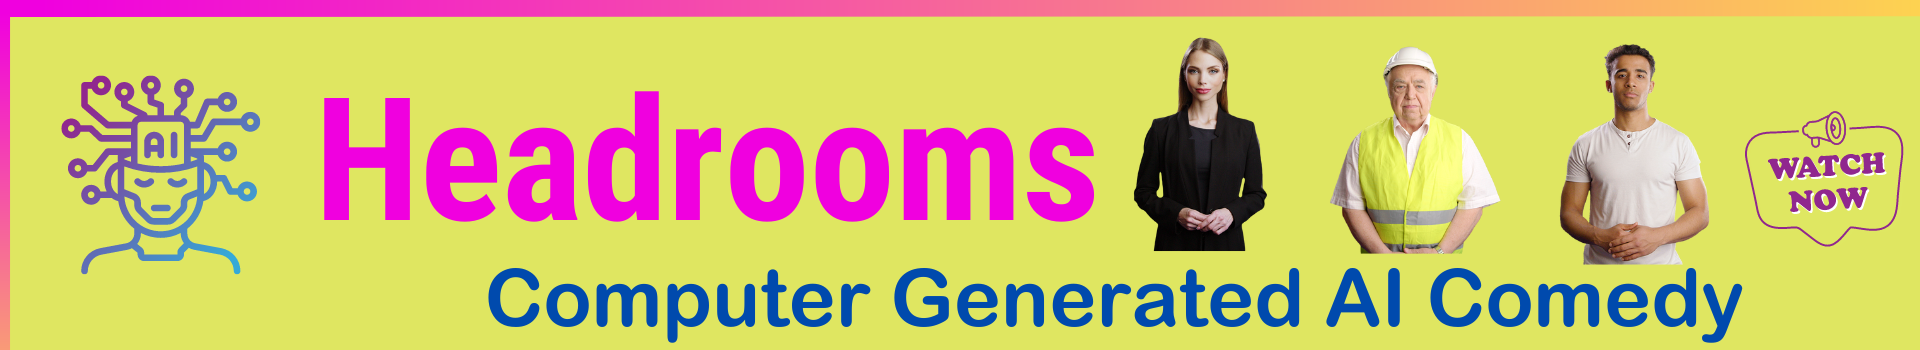 Headrooms Banner